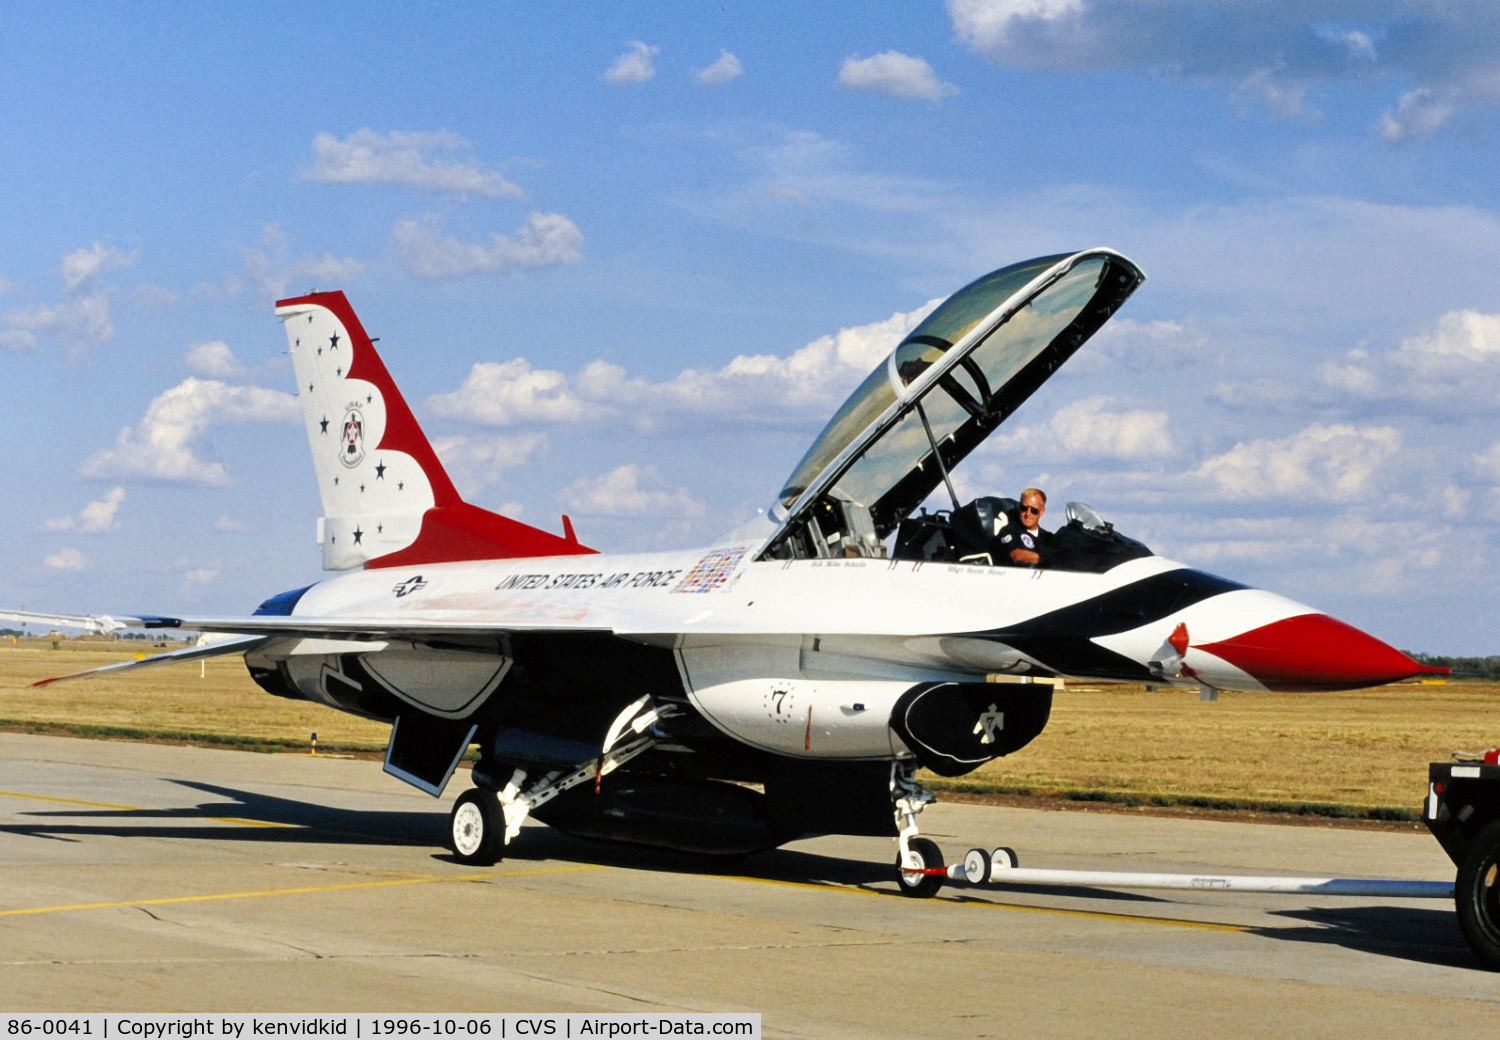 86-0041, 1986 General Dynamics F-16D Fighting Falcon C/N 5D-45, Copied from slide.